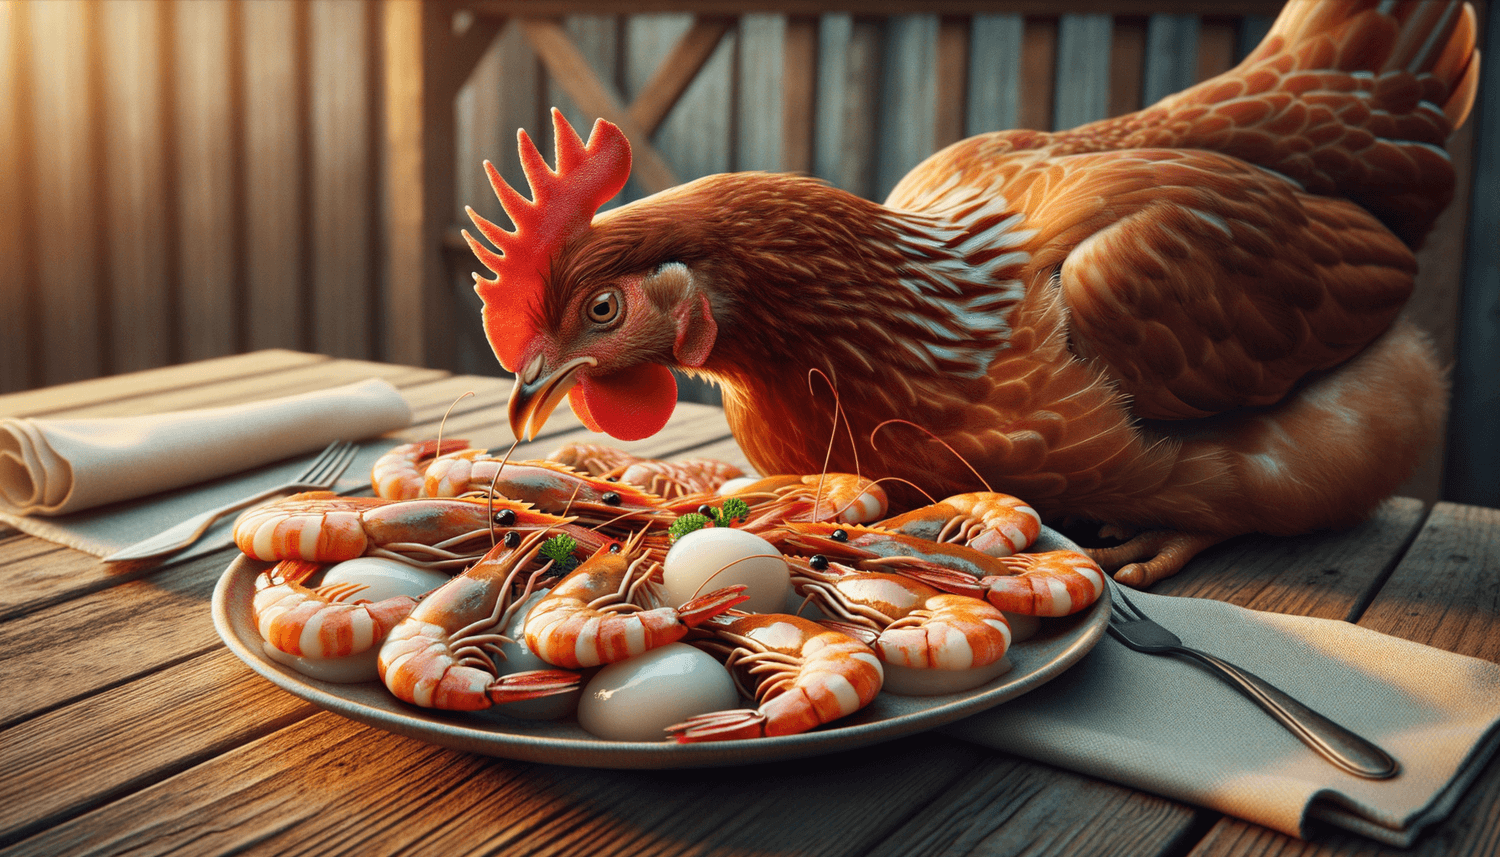 Can Chickens Eat Shrimp?